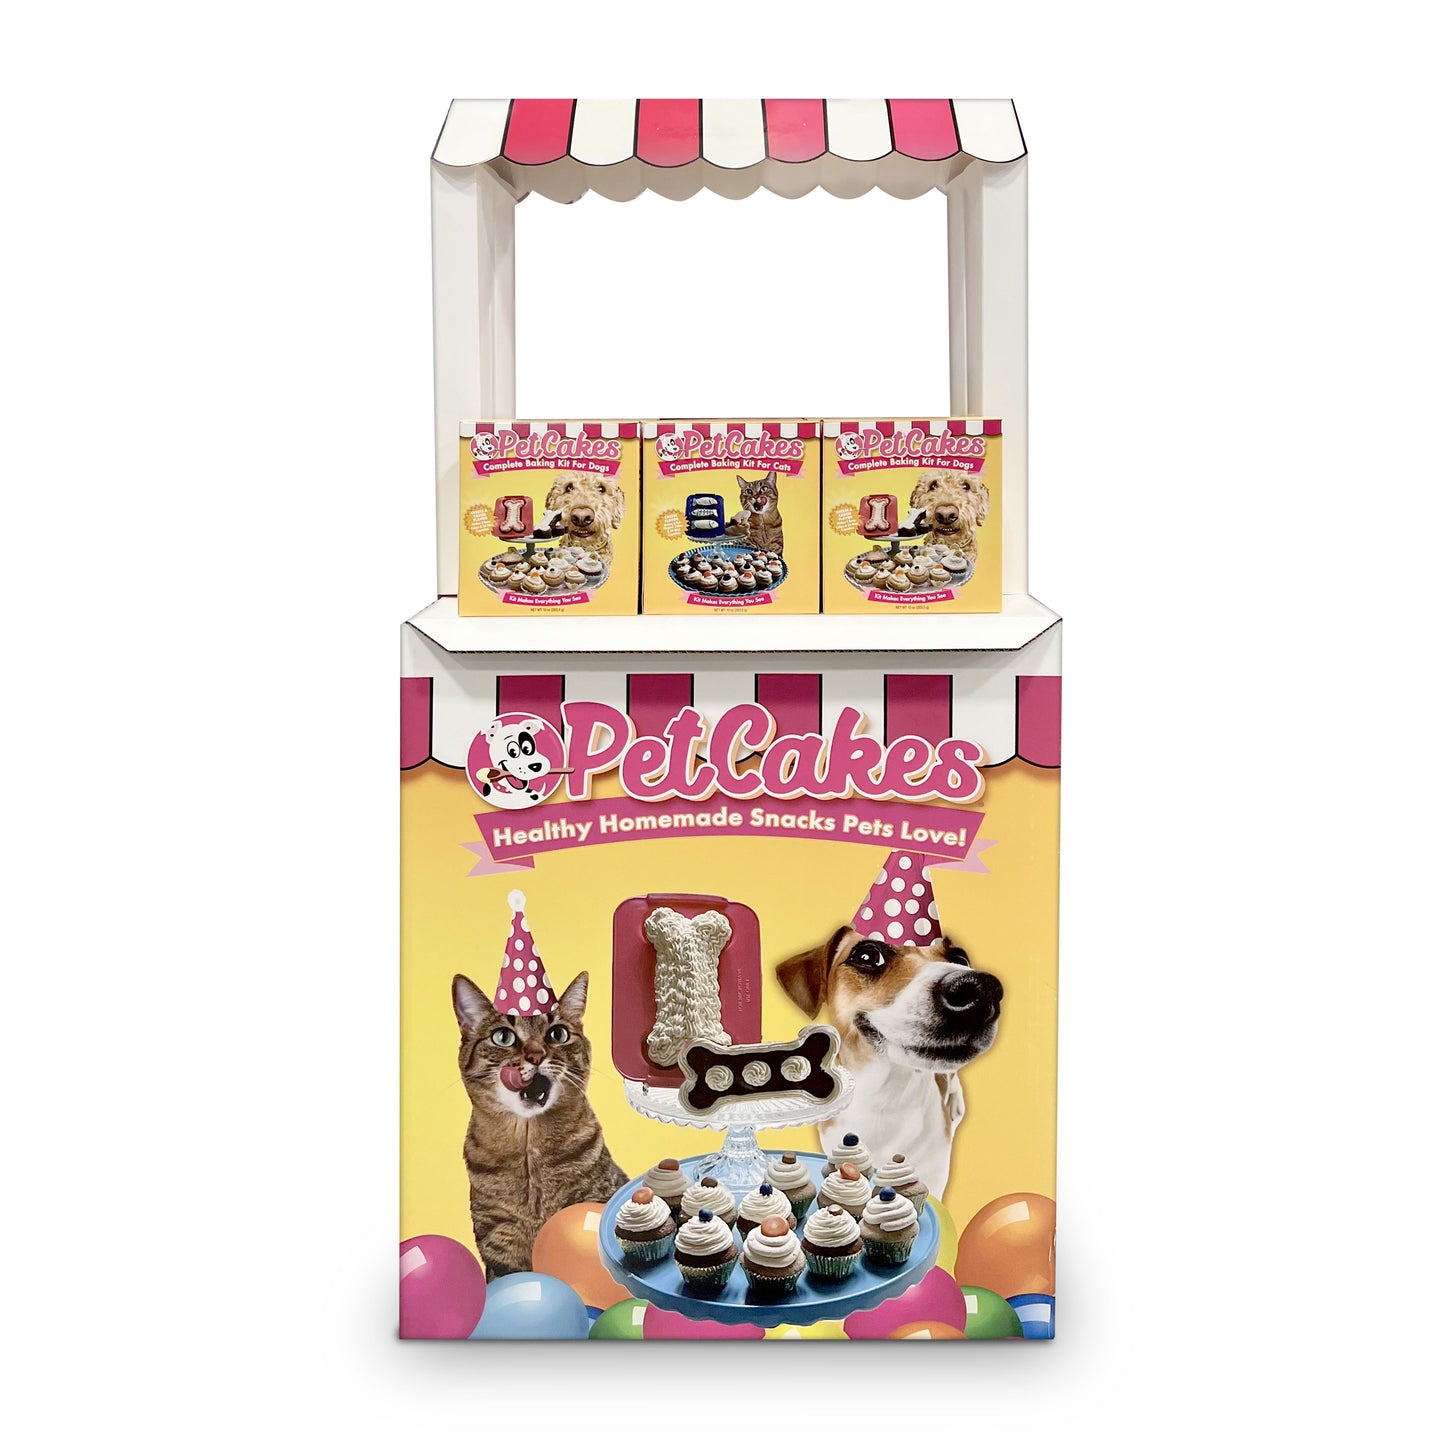 PetCakes Dog & Cat Shipper - Complete Baking Kit for Dogs & Cats - 3 Shipper Min